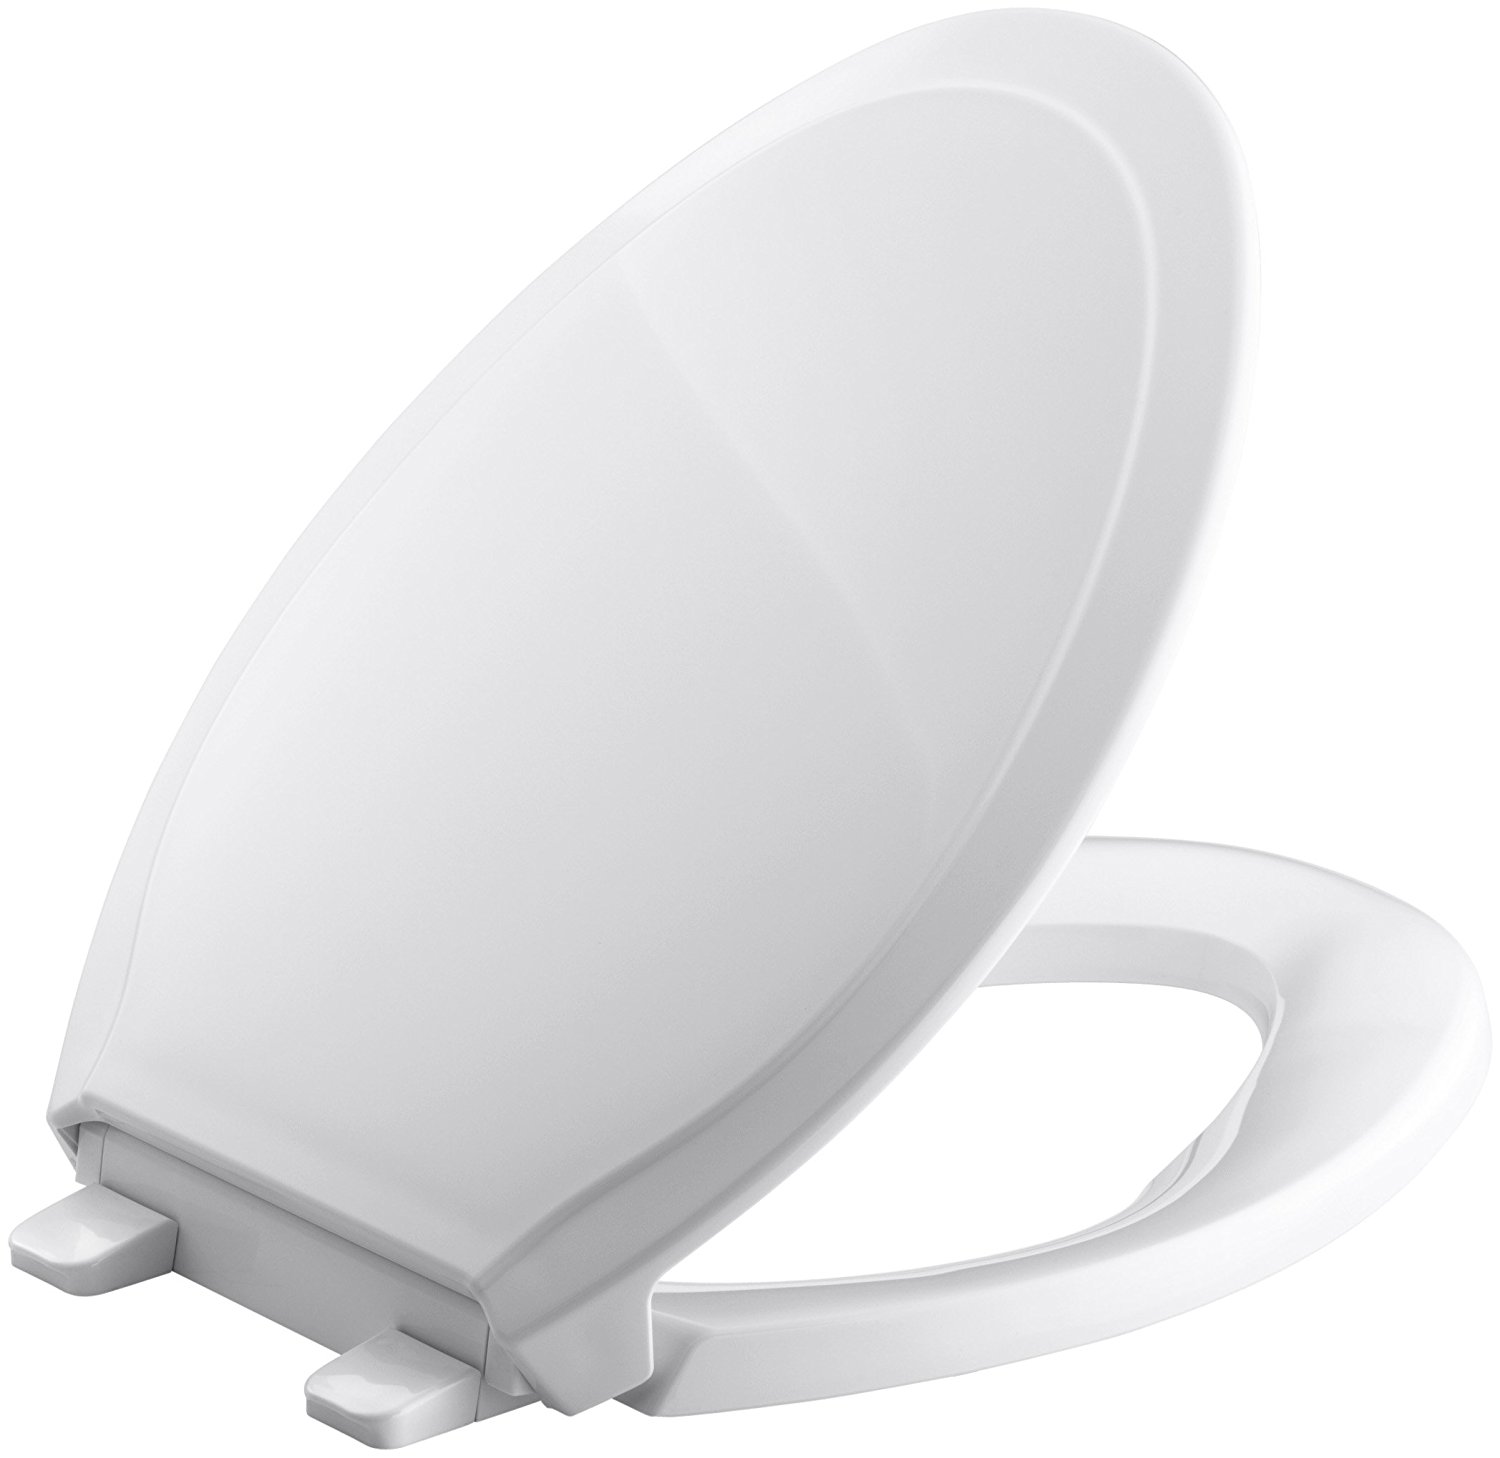 KOHLER K-4734-0 Rutledge Quiet-Close with Grip-Tight Bumpers Elongated Toilet Seat, White